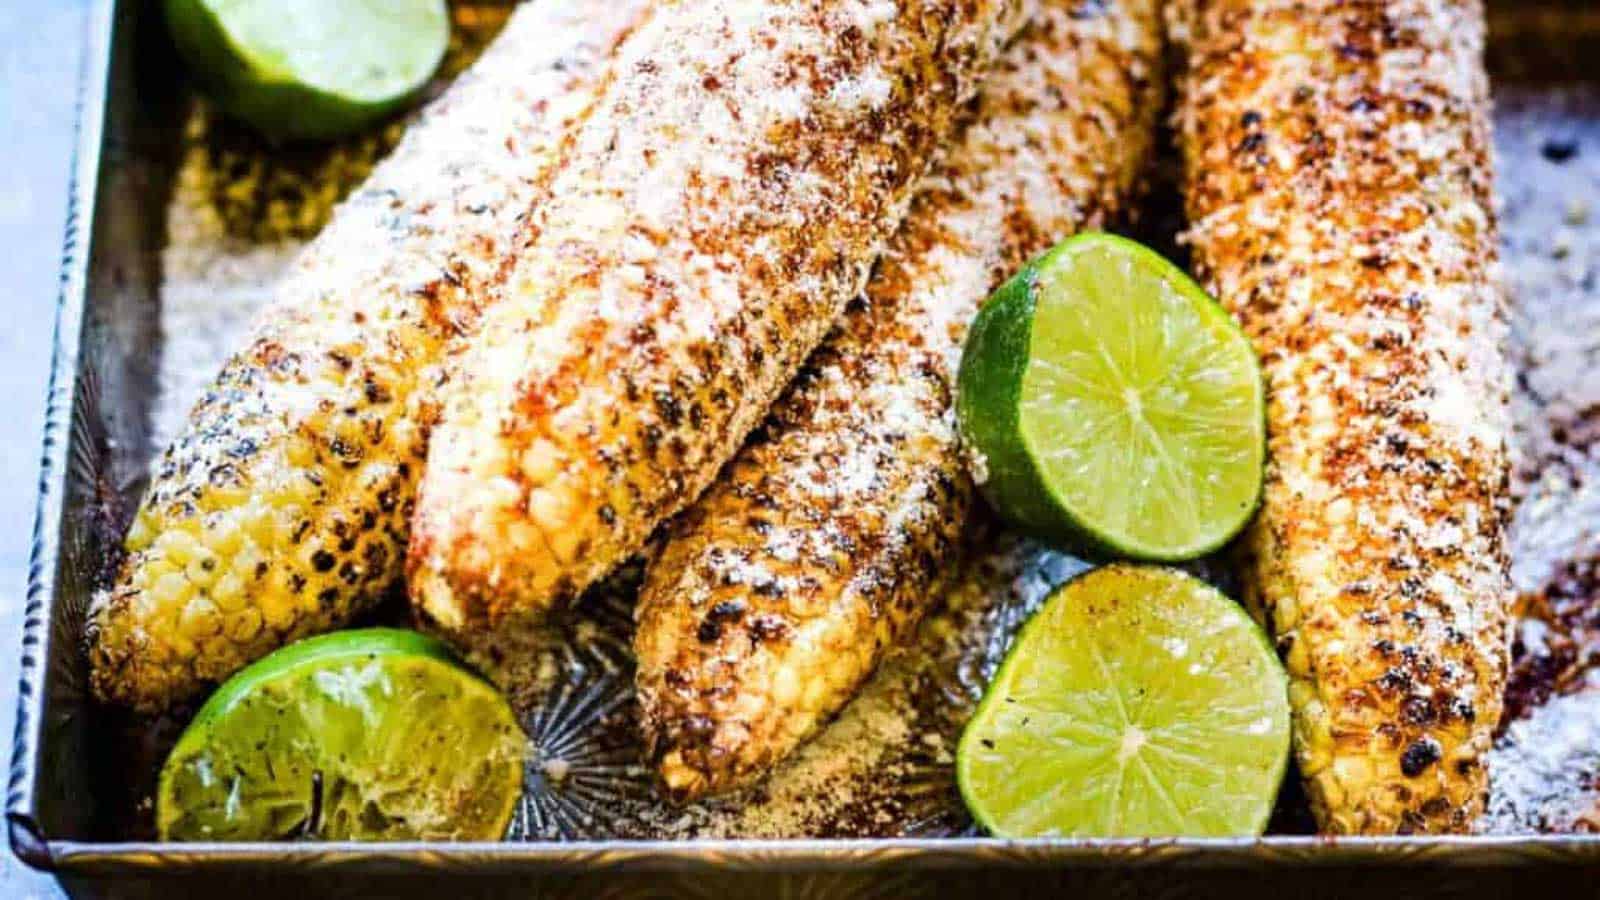 metal baking pan with elote, Mexican grilled corn cobs with mayonnaise, spices, and cheese.